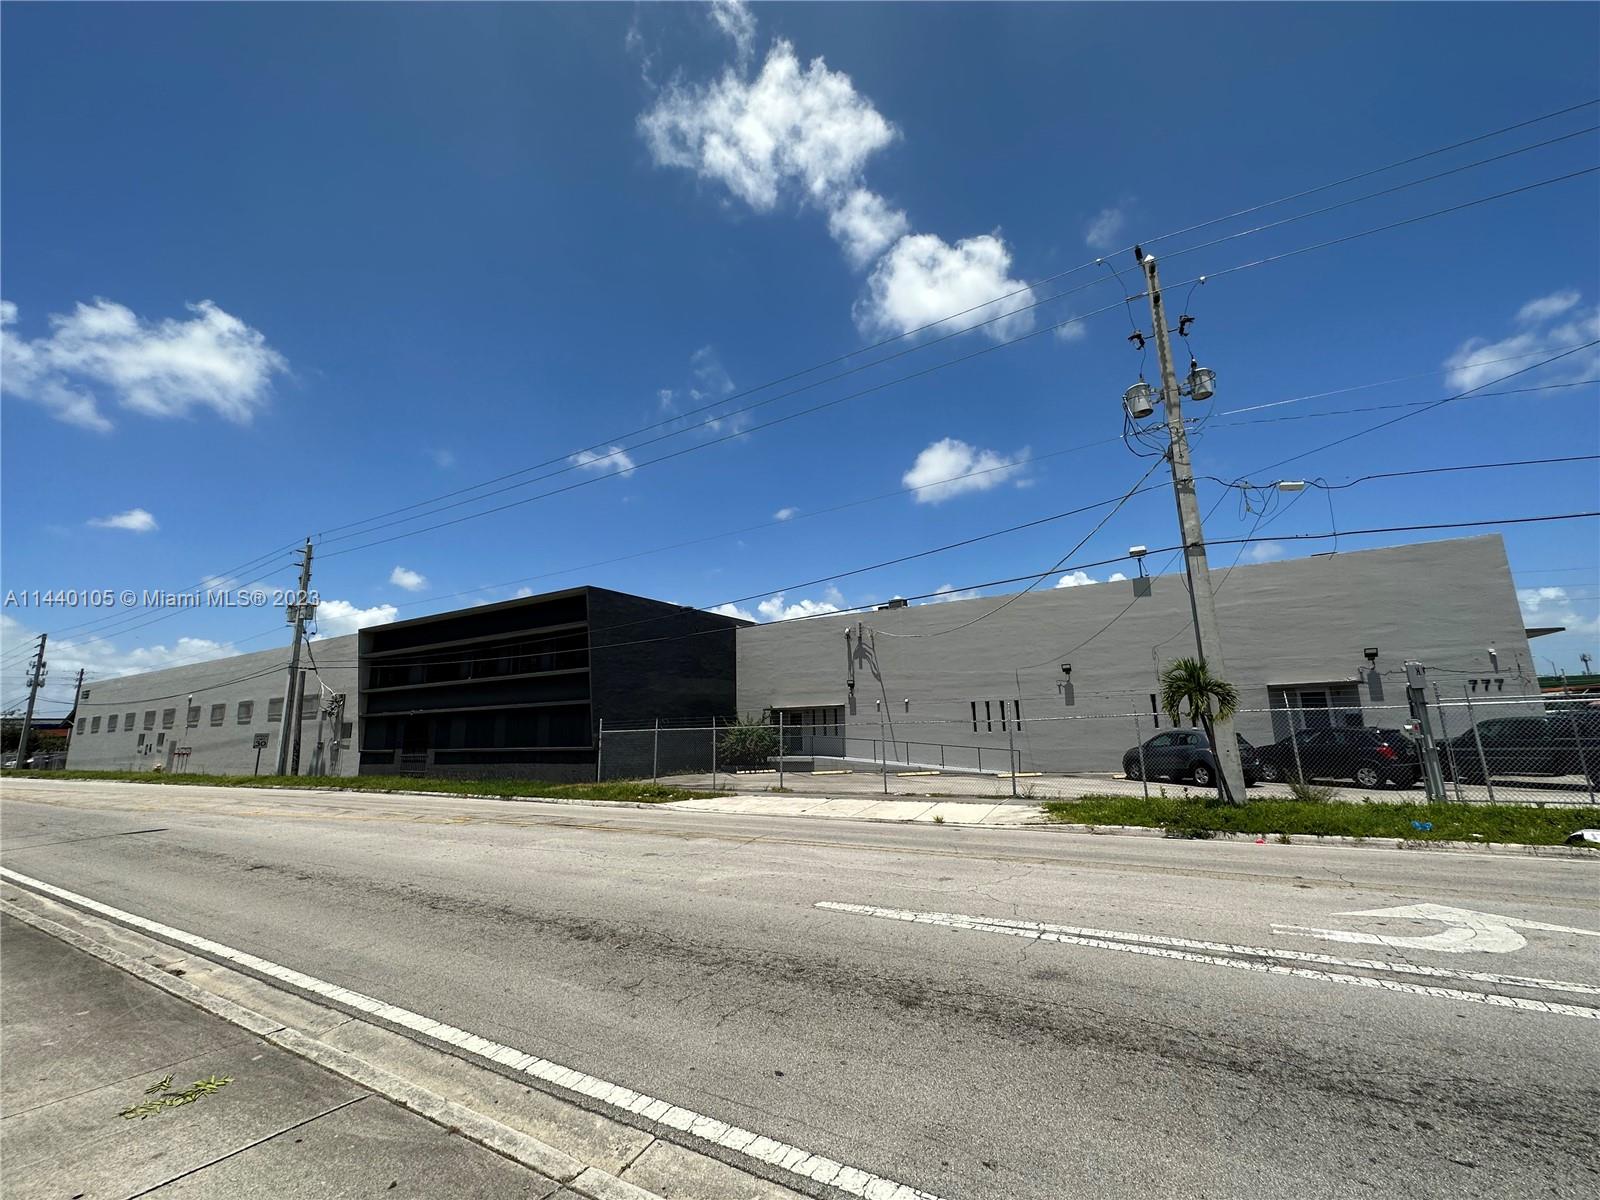 775 NW 71st St, Miami, Florida 33150, ,Commercialsale,For Sale,775 NW 71st St,A11440105